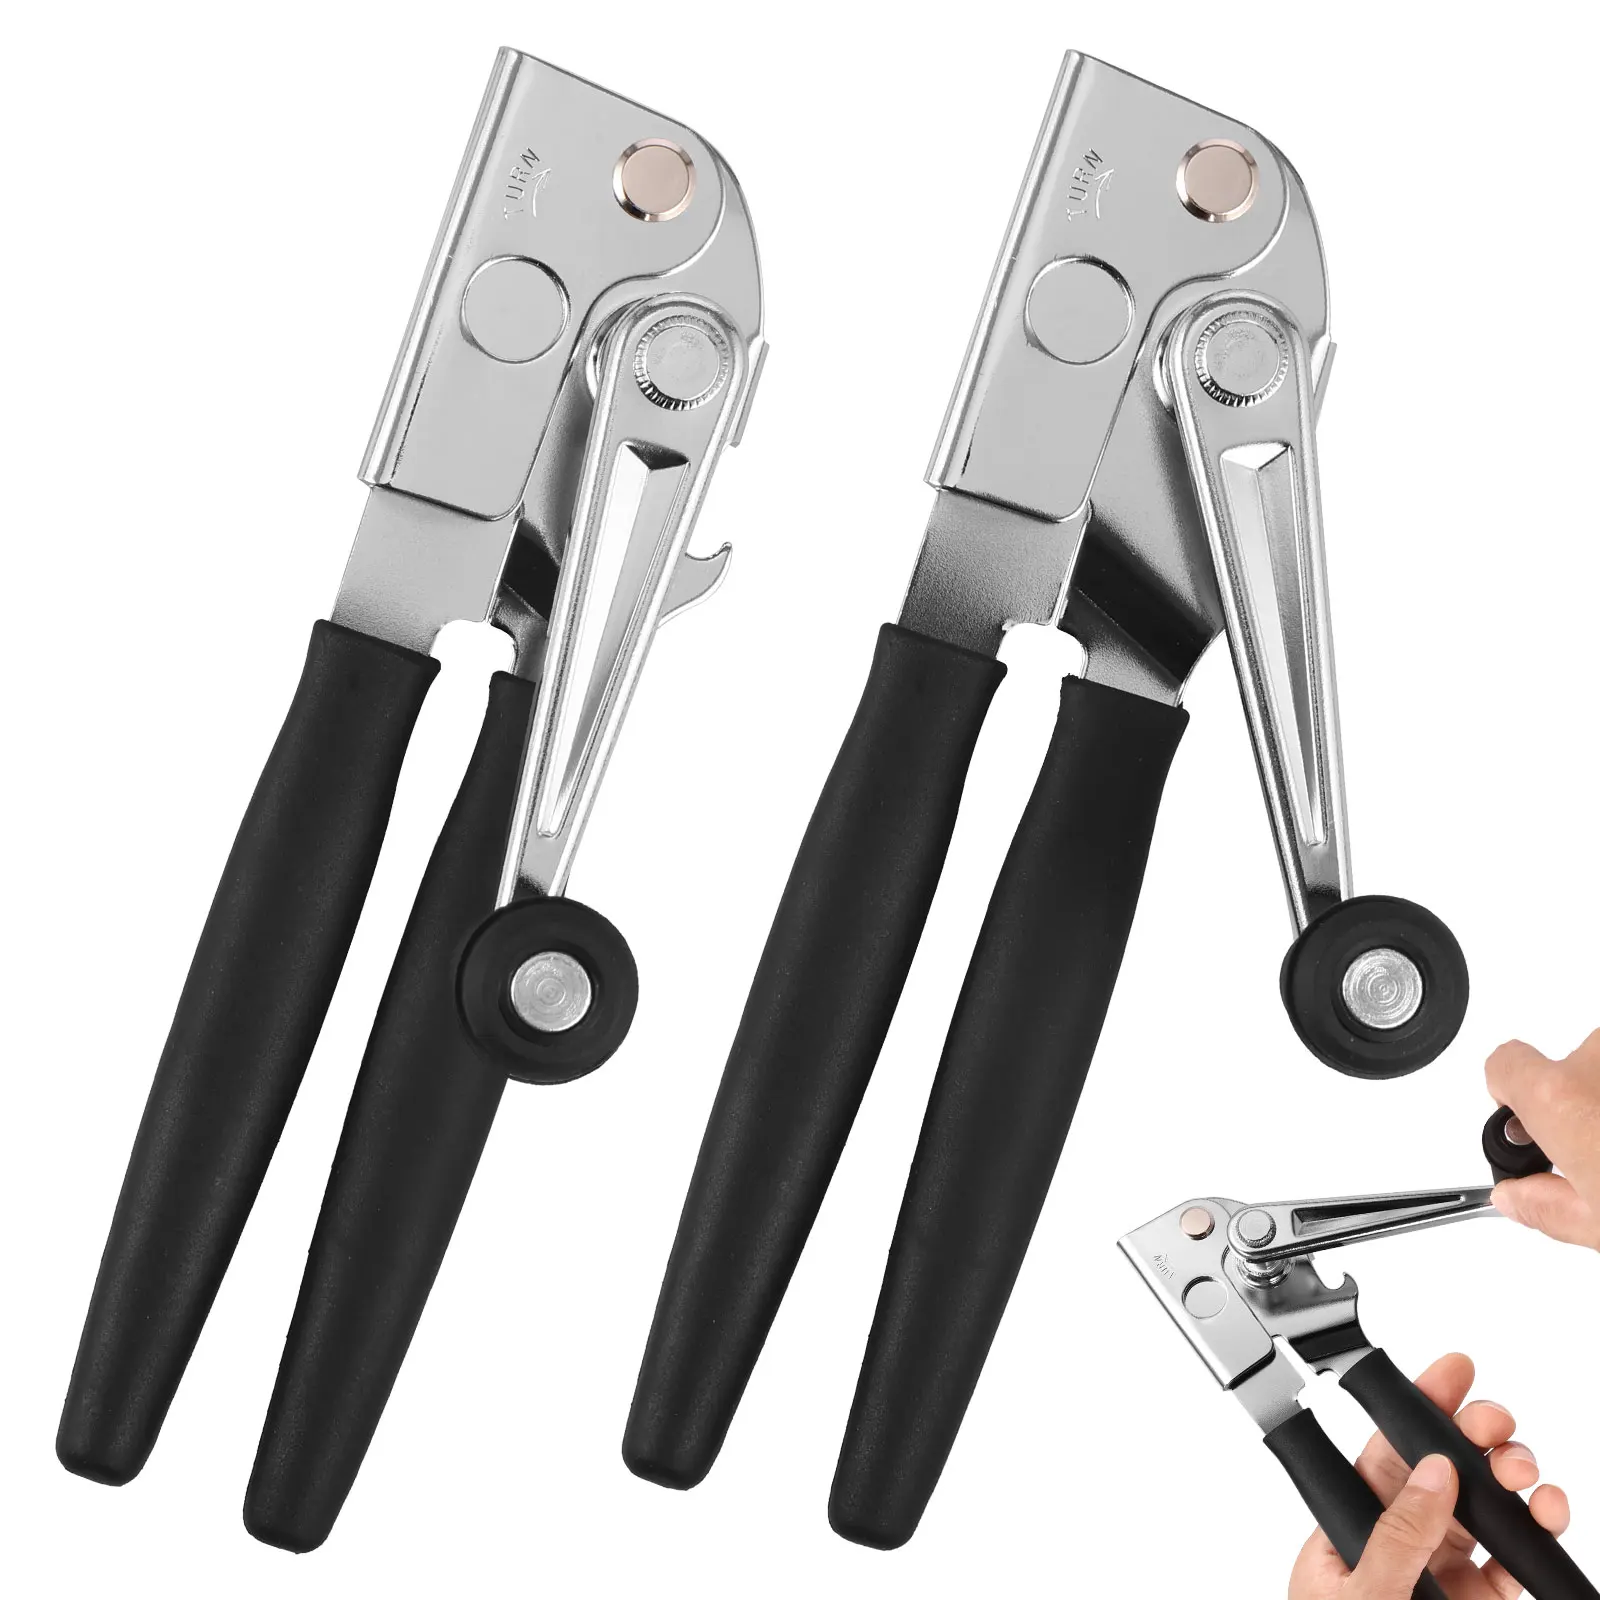 

2Pcs Hand Crank Can Opener with Ergonomic Handle Stainless Steel Manual Bottle Opener Smooth Edge with Sharp Blades Labor Saving